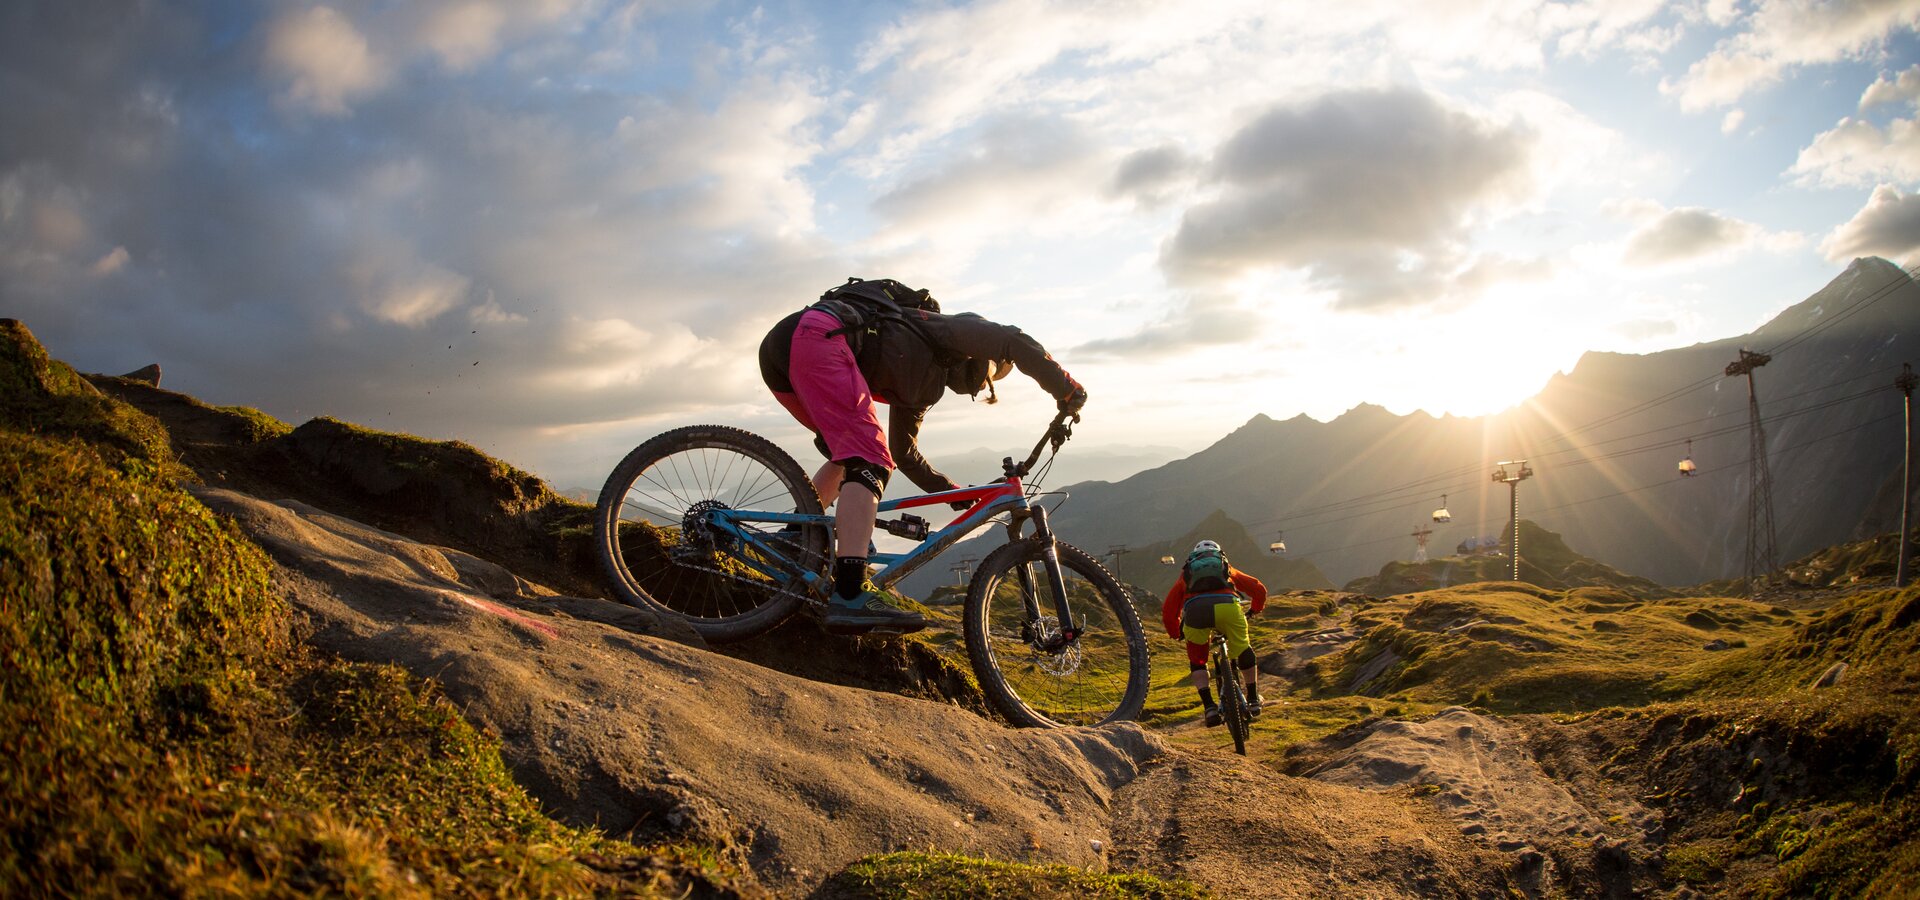 A real paradise for mountain bikers | © SalzburgerLand - David Schultheiss for WOM Medien